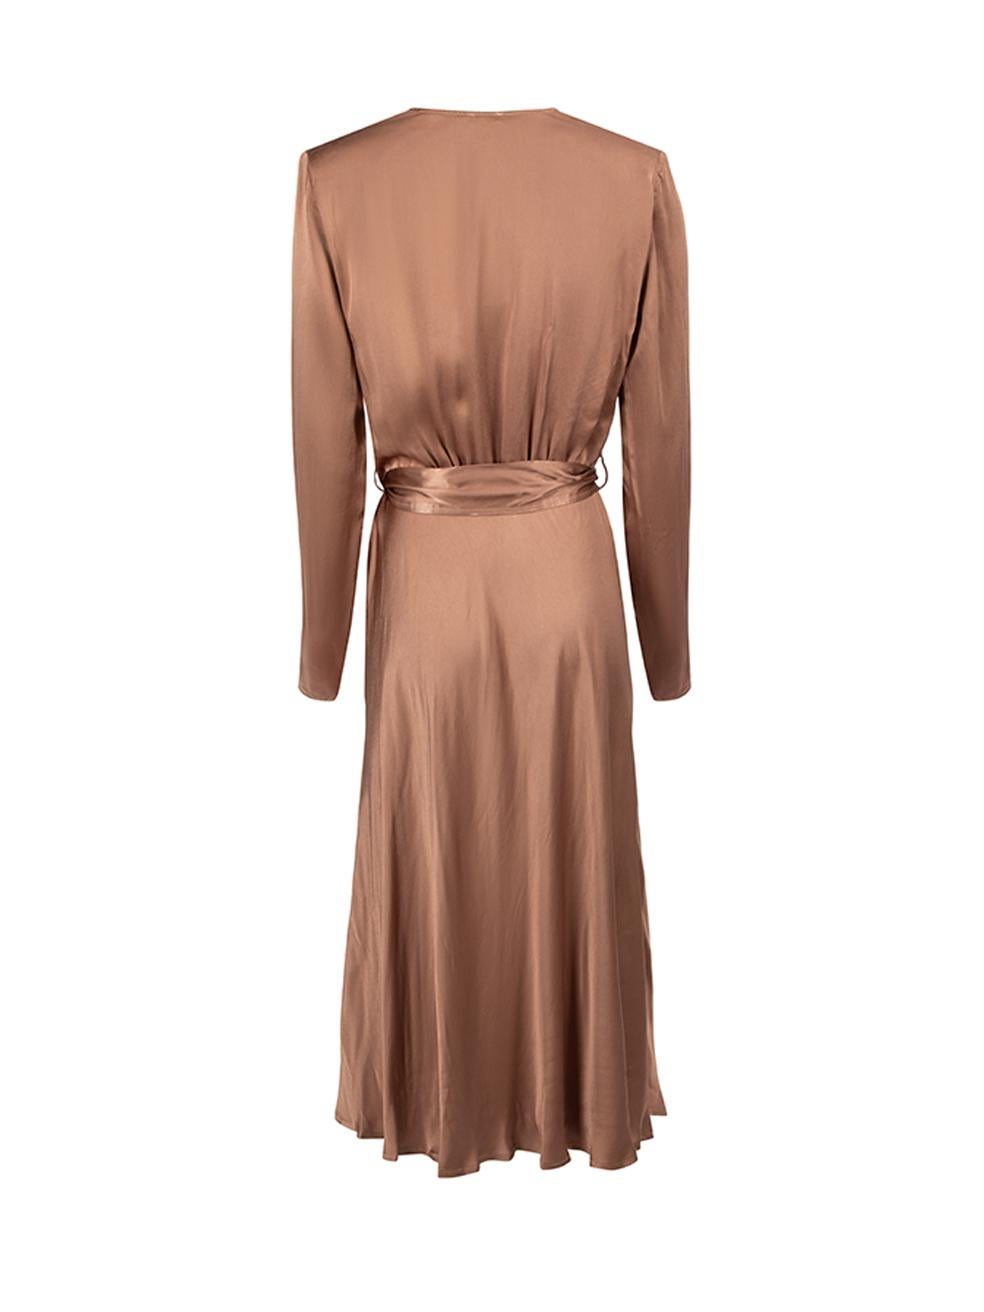 Ghost London Women's Brown Belted Long Sleeved Midi Dress For Sale 1